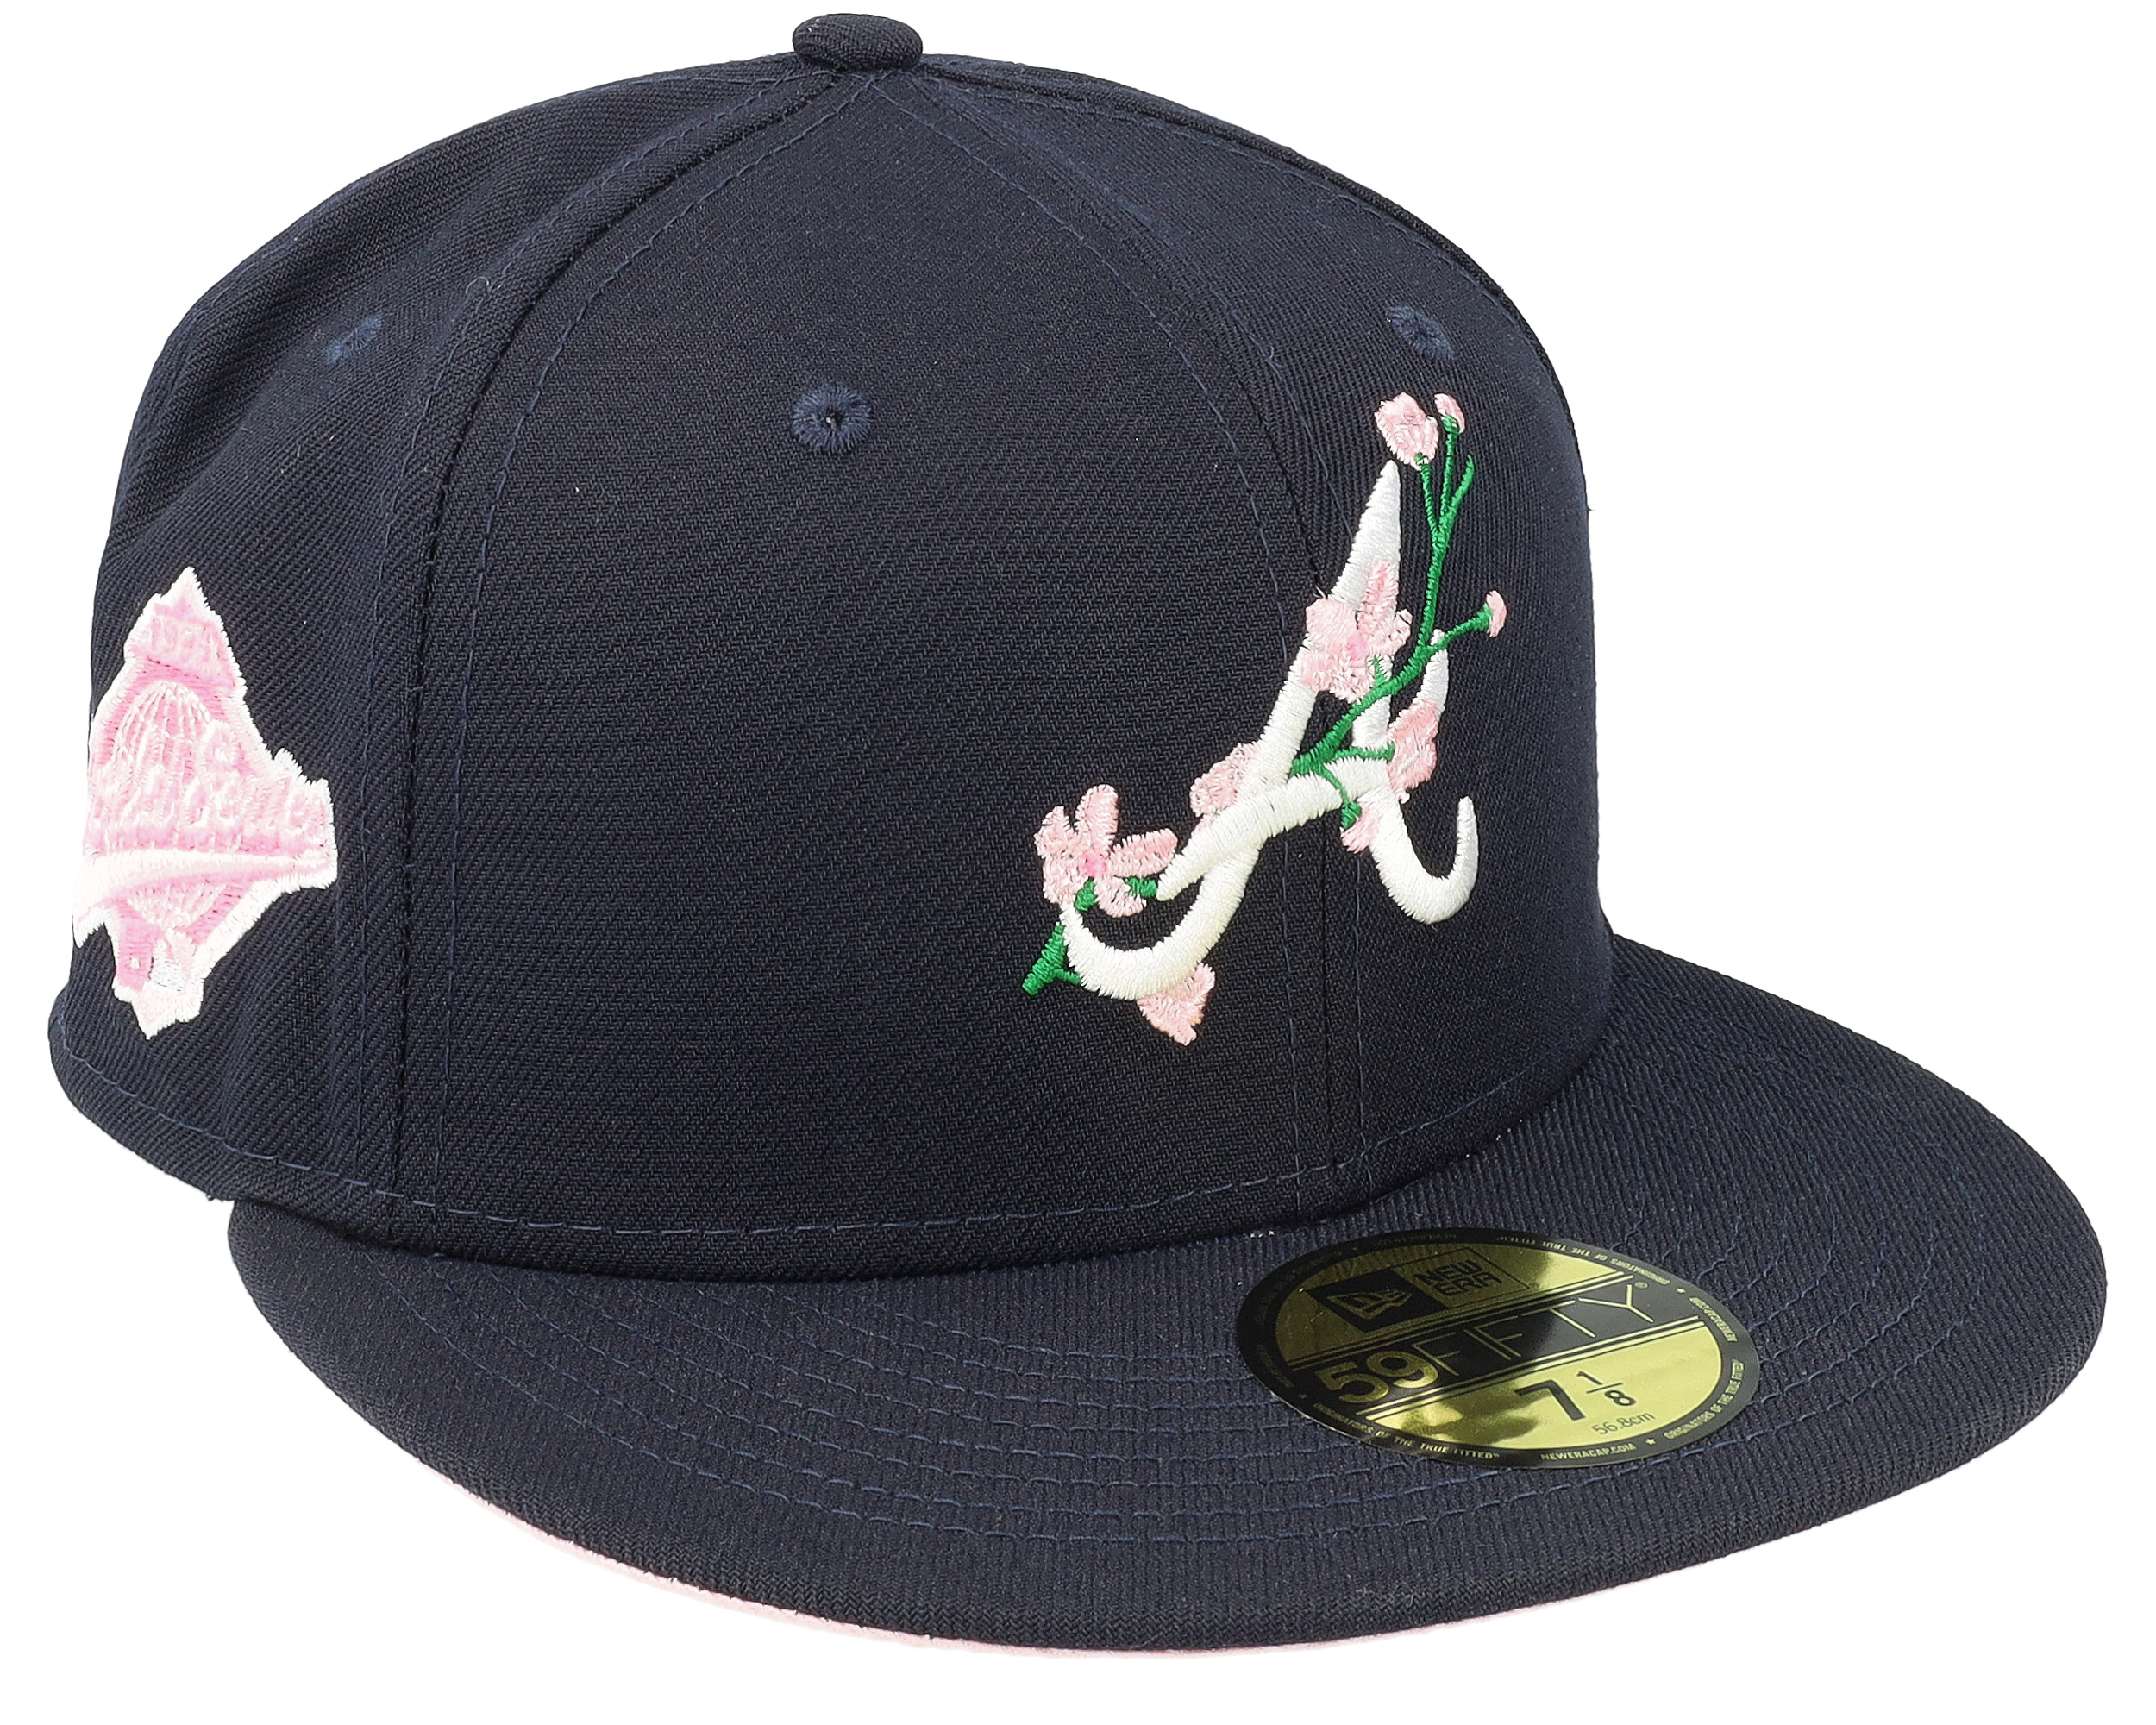 Atlanta Braves 59FIFTY Sidepatchbloom Navy Fitted - New Era cap